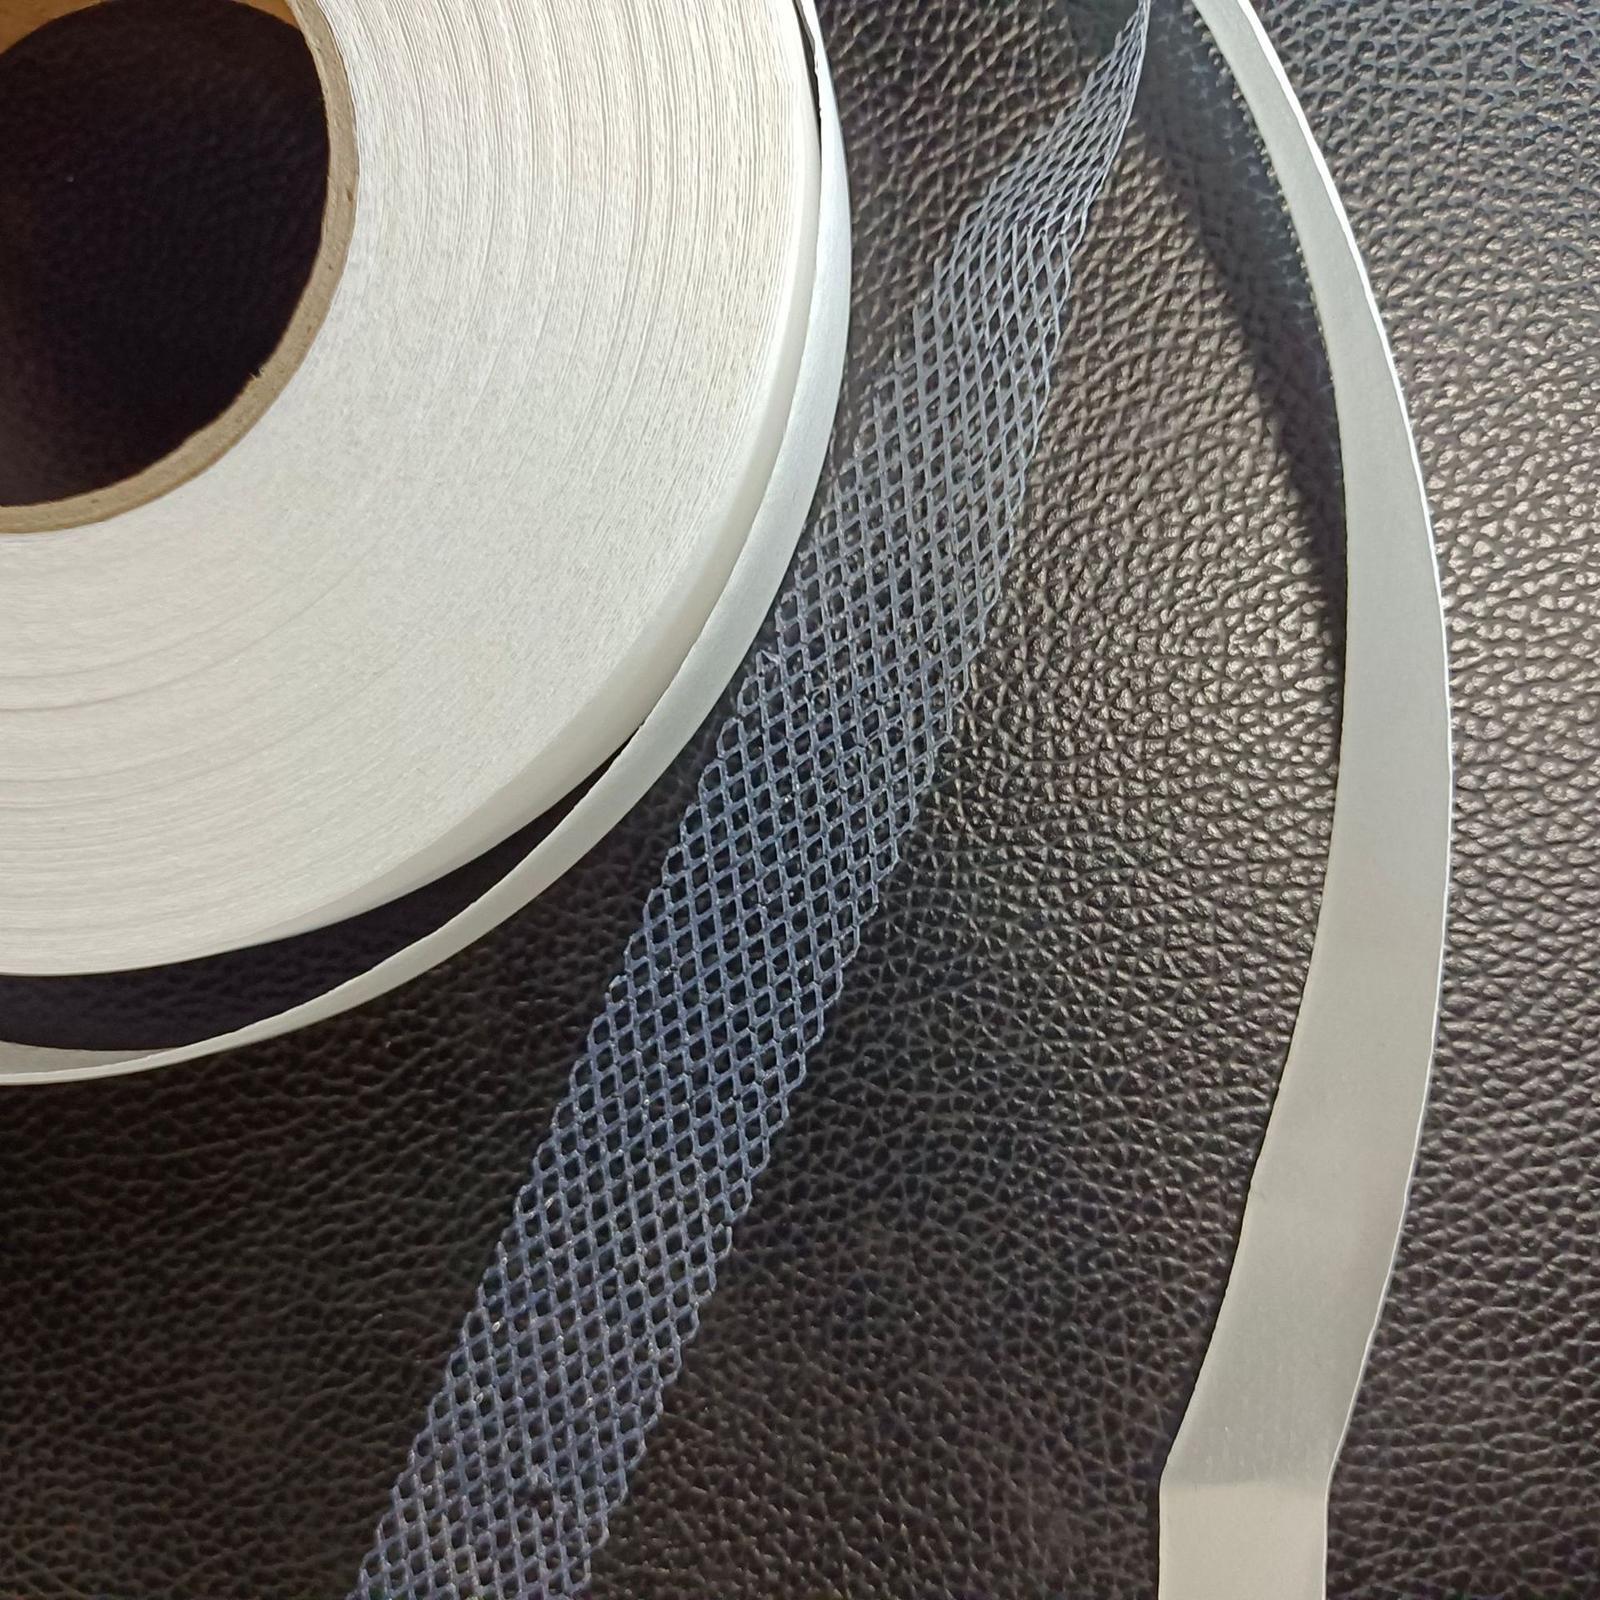 Iron  Tape Fabric Fusing Hemming Tape Wonder  Sewing Accessories, Cloth Tape Washable Double Sided Tape for Trouser, Dress, Skirts